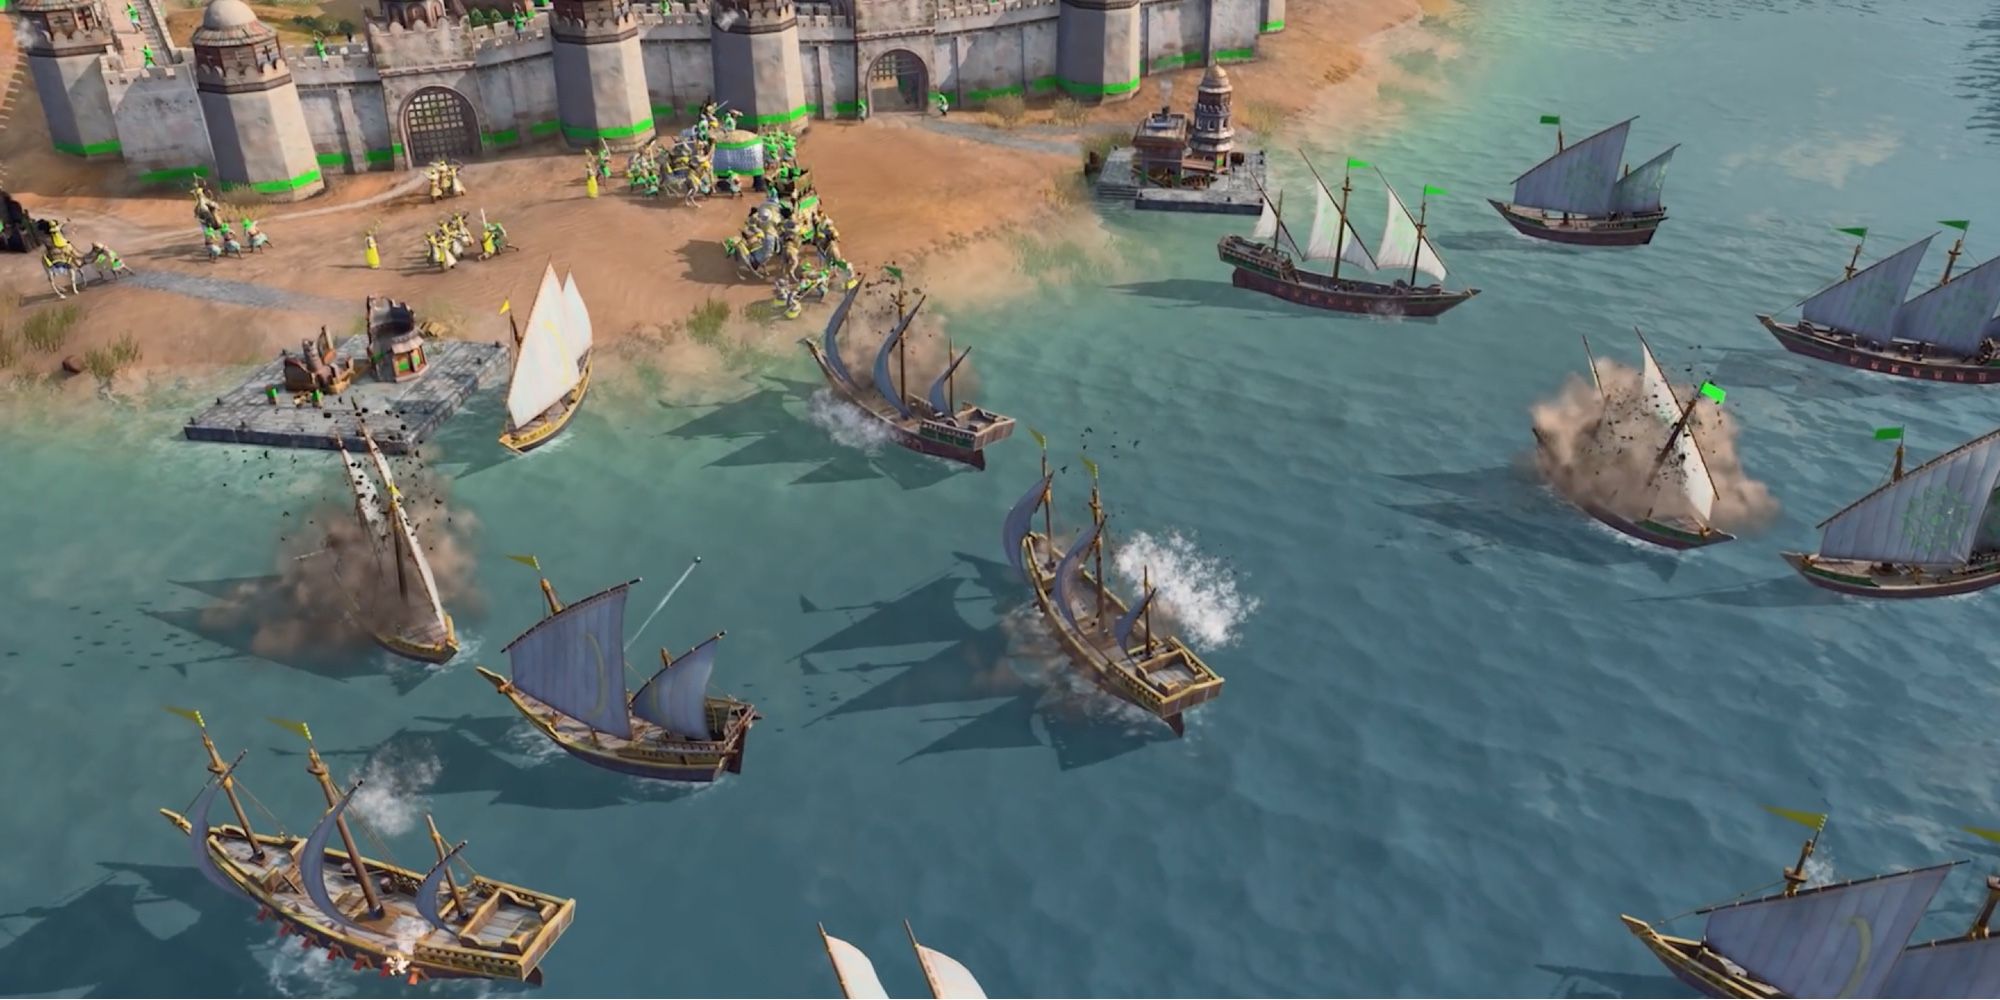 Age of Empires 4 - Ships attacking enemies on the coastline